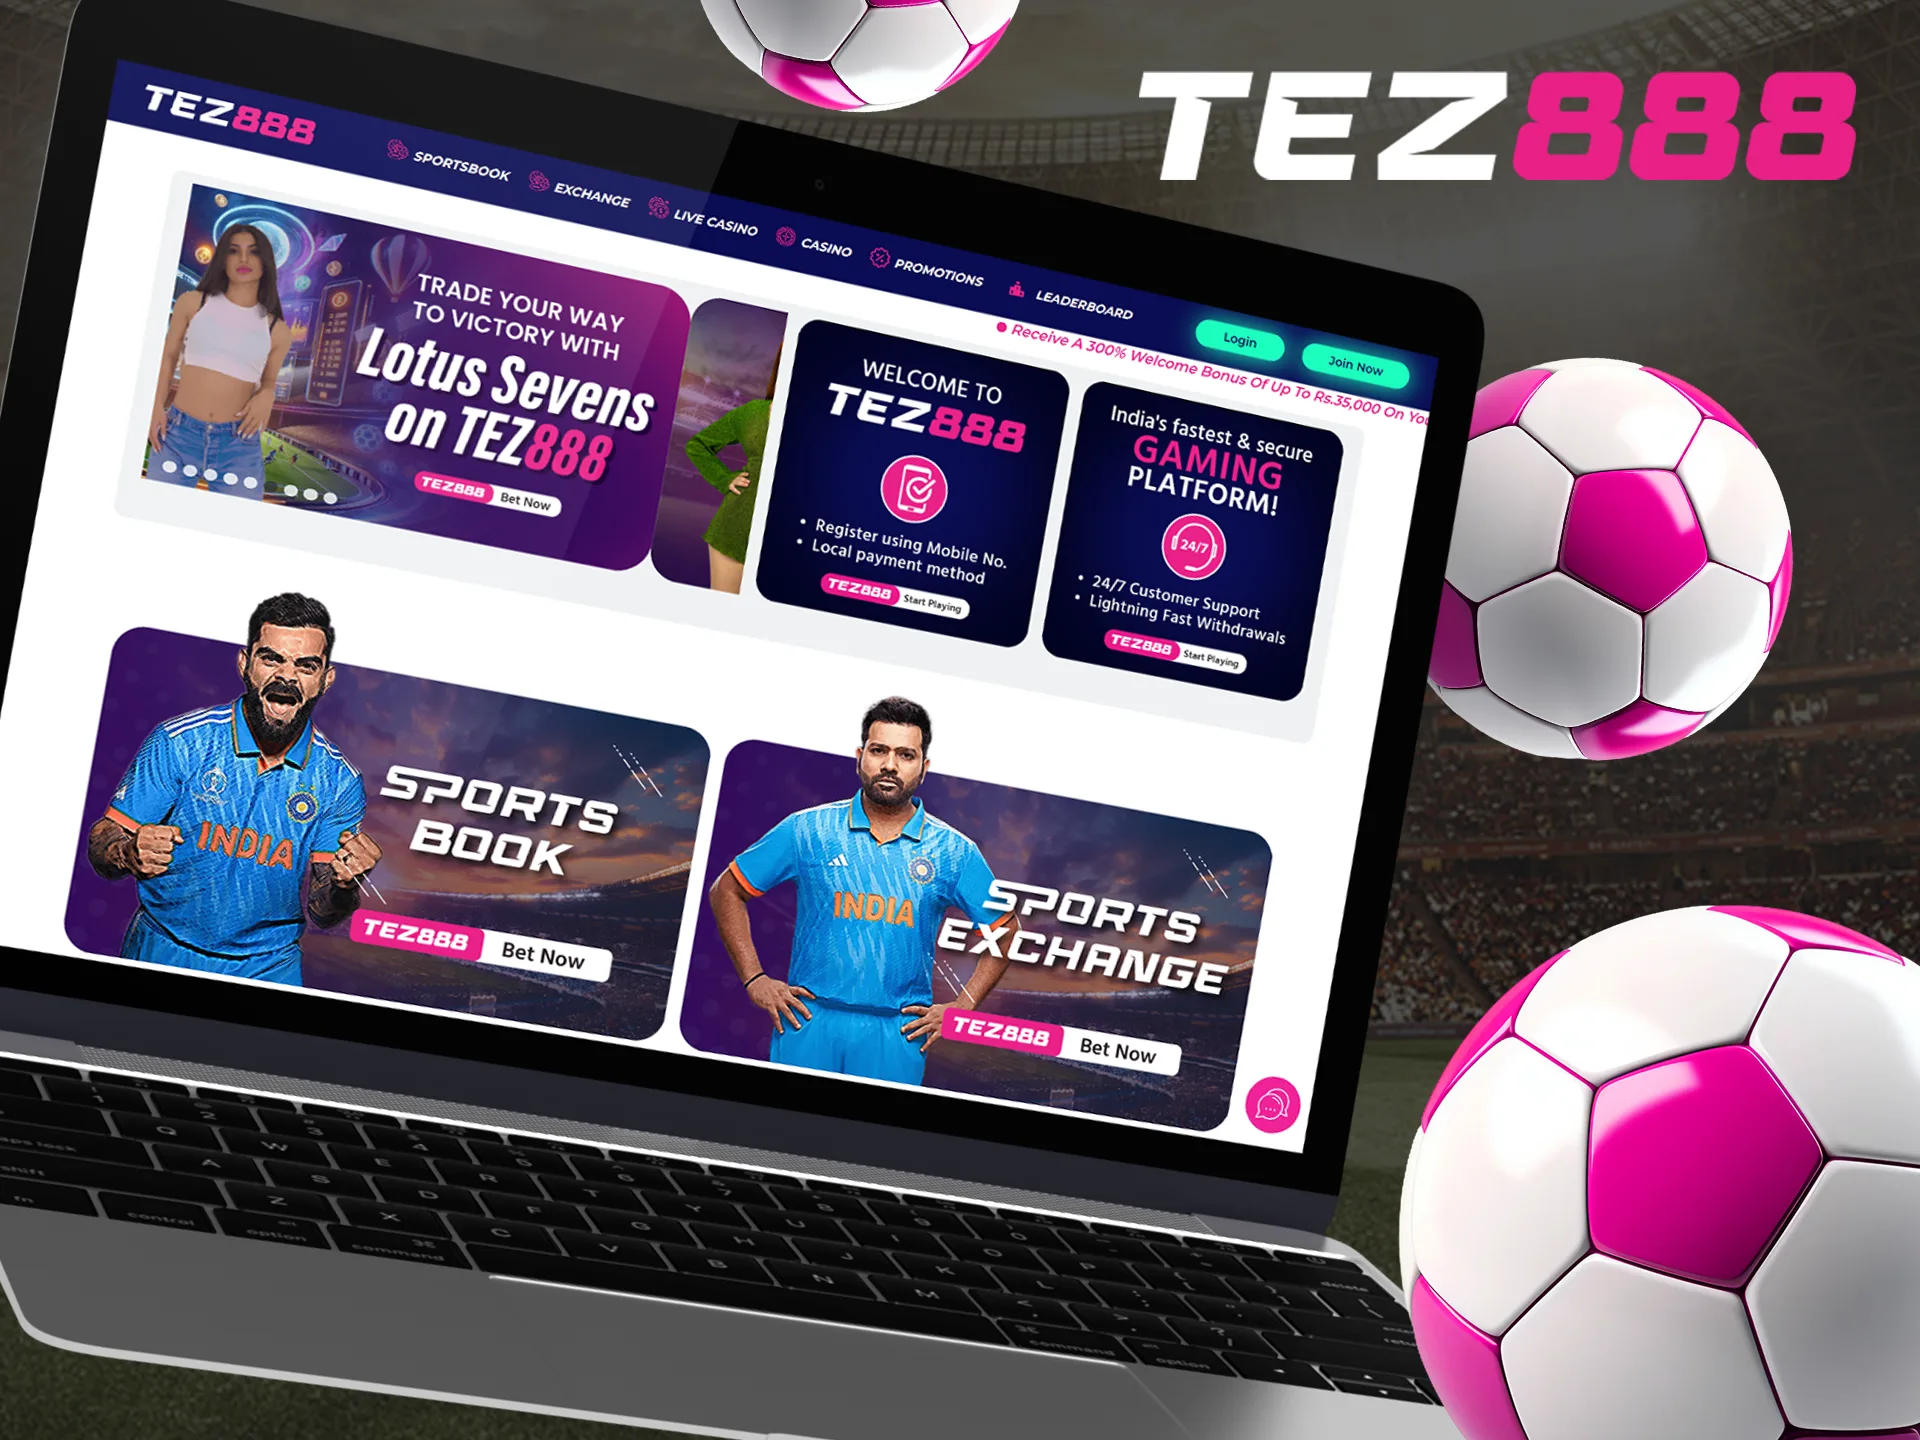 Watch live football matches, place your bets and have fun with Tez888.